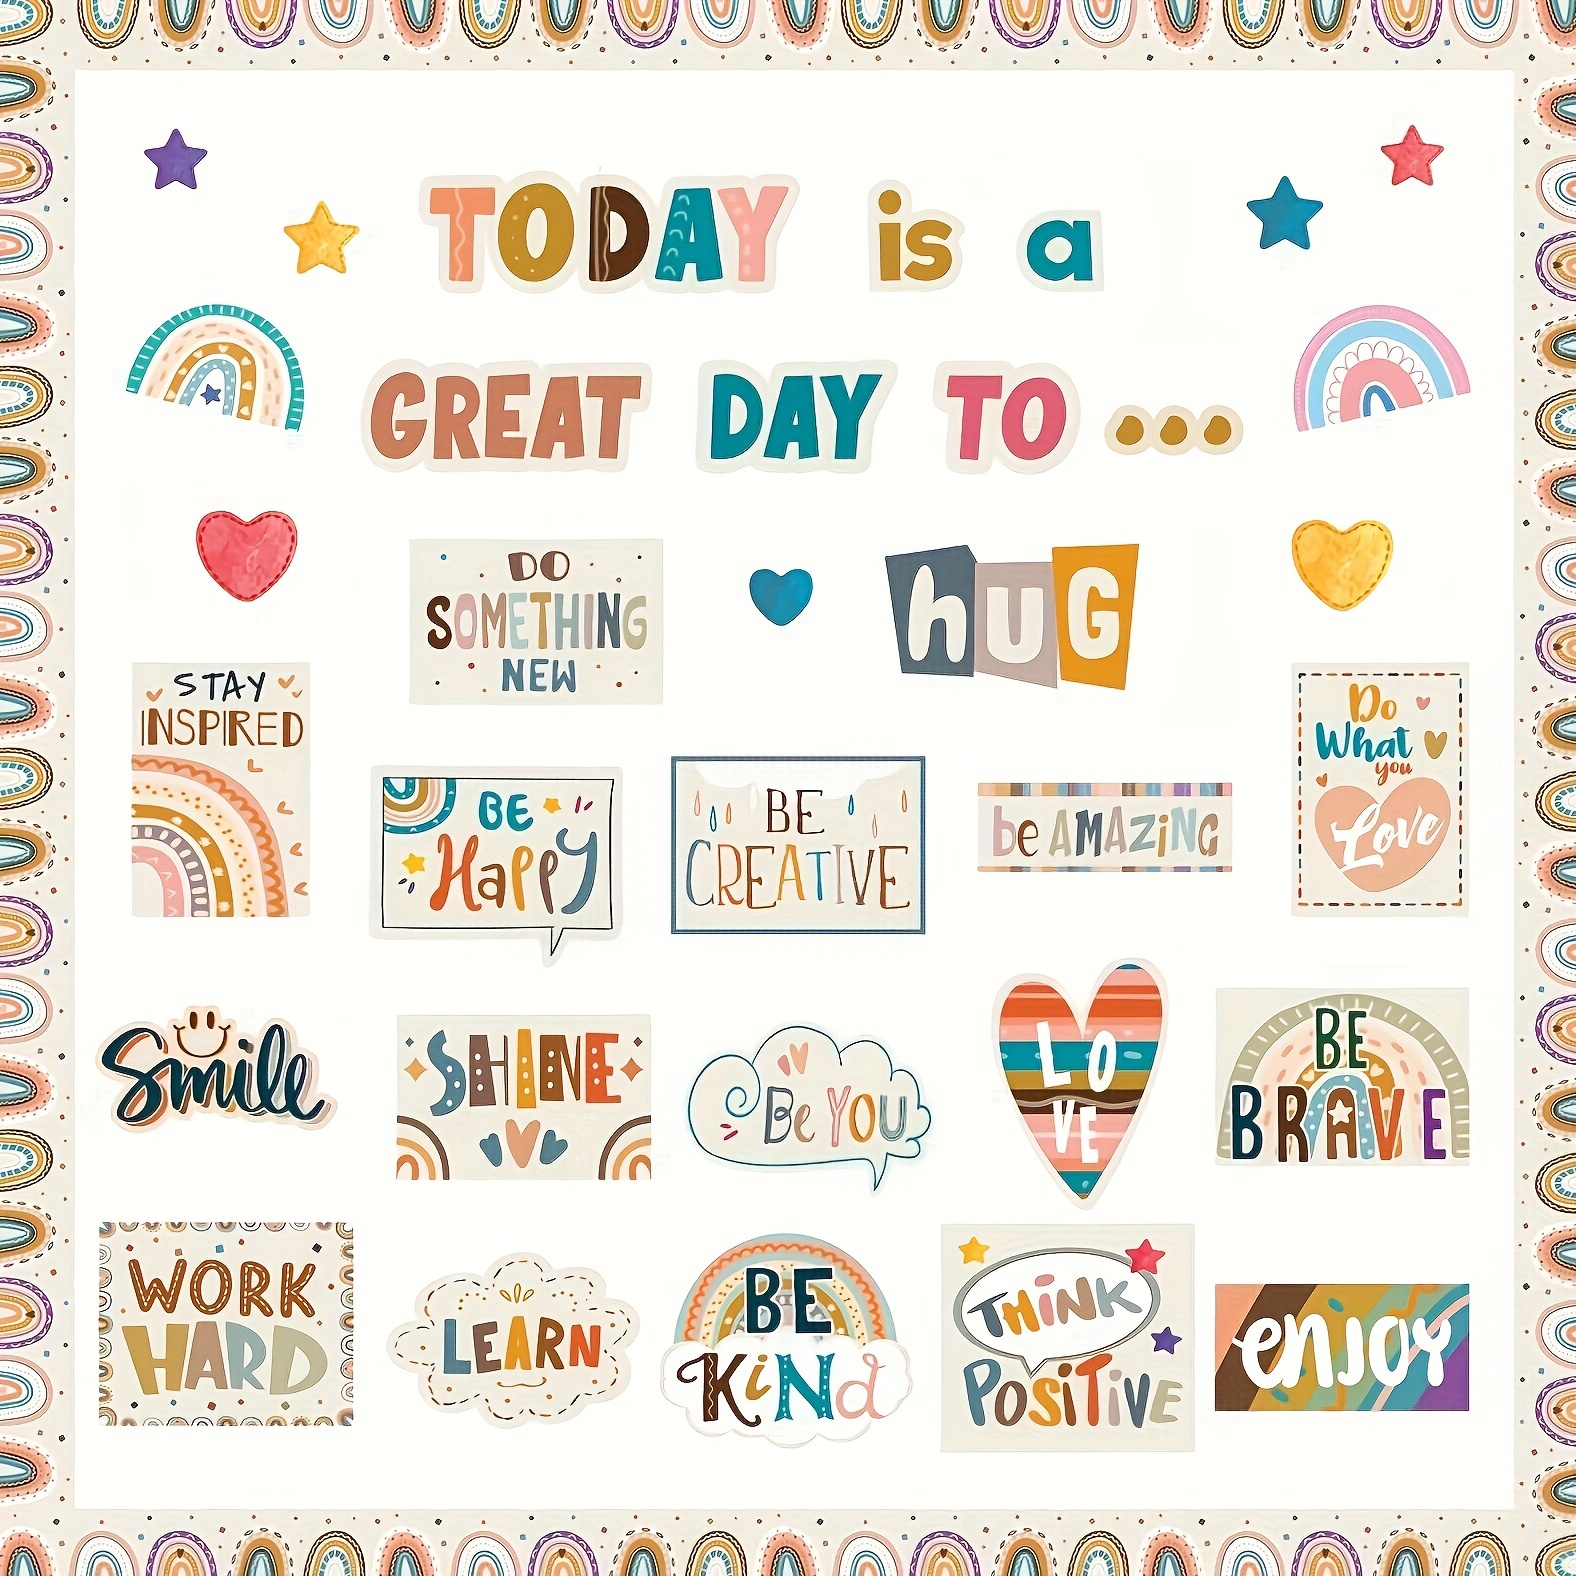 

Today Is A Great Day Bulletin Board Set Boho Rainbow Inspiration Classroom Decor For Teachers Positive Affirmations Accents Motivational Cutouts For Class School Bulletin Board Decoration Supplies